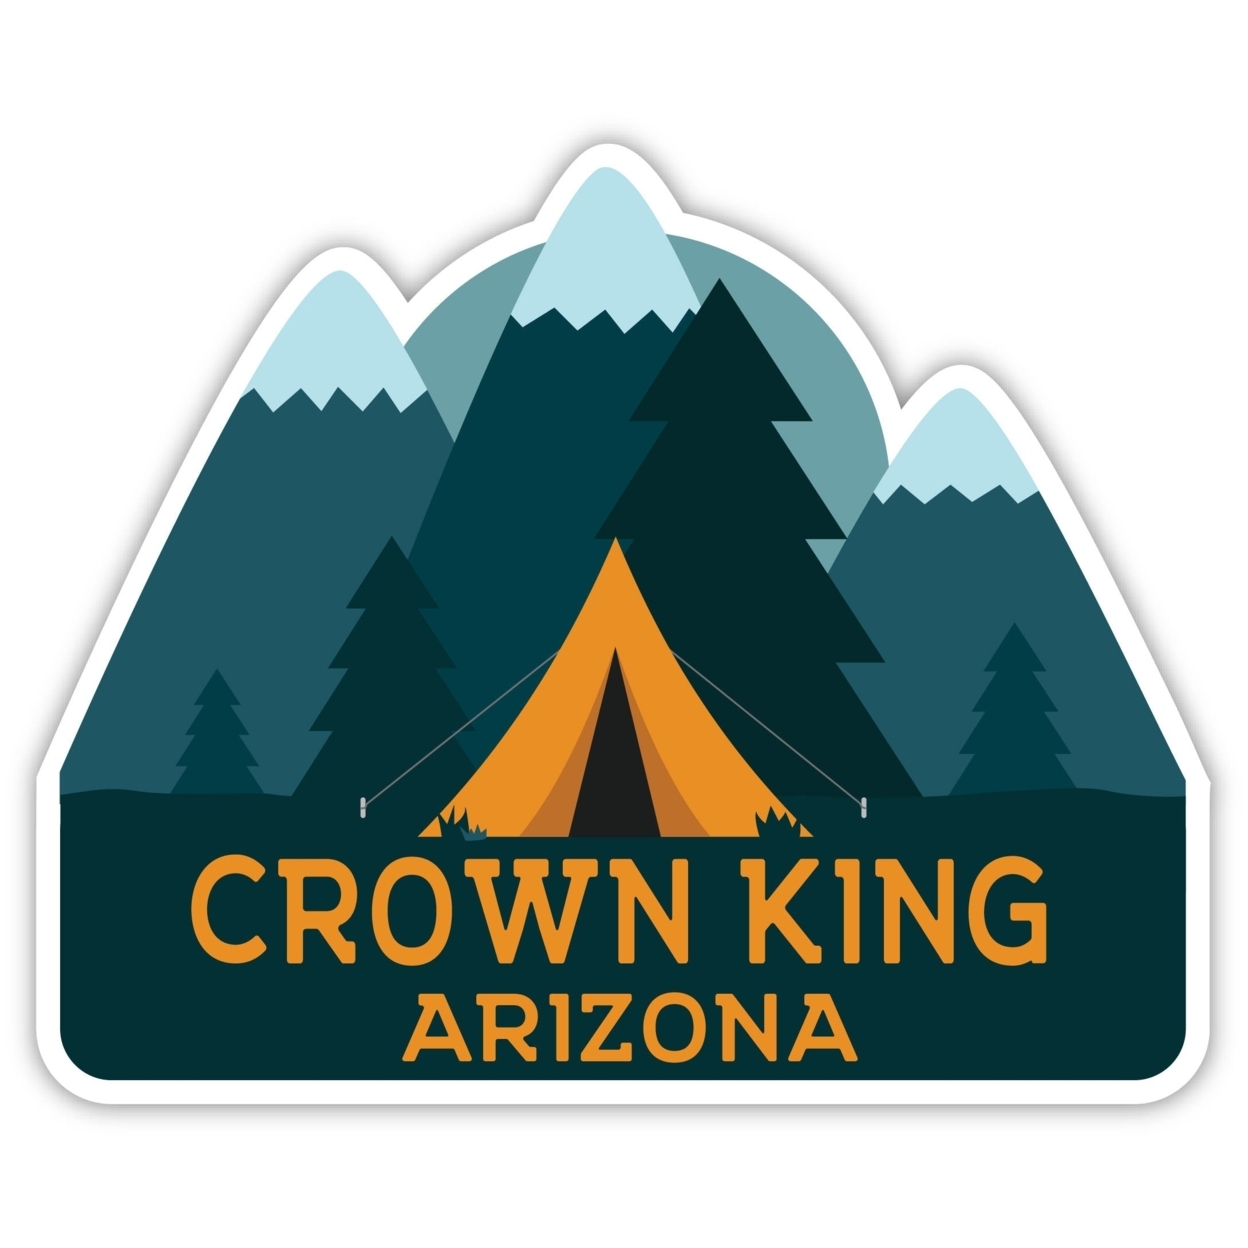 Crown King Arizona Souvenir Decorative Stickers (Choose Theme And Size) - 4-Pack, 4-Inch, Tent